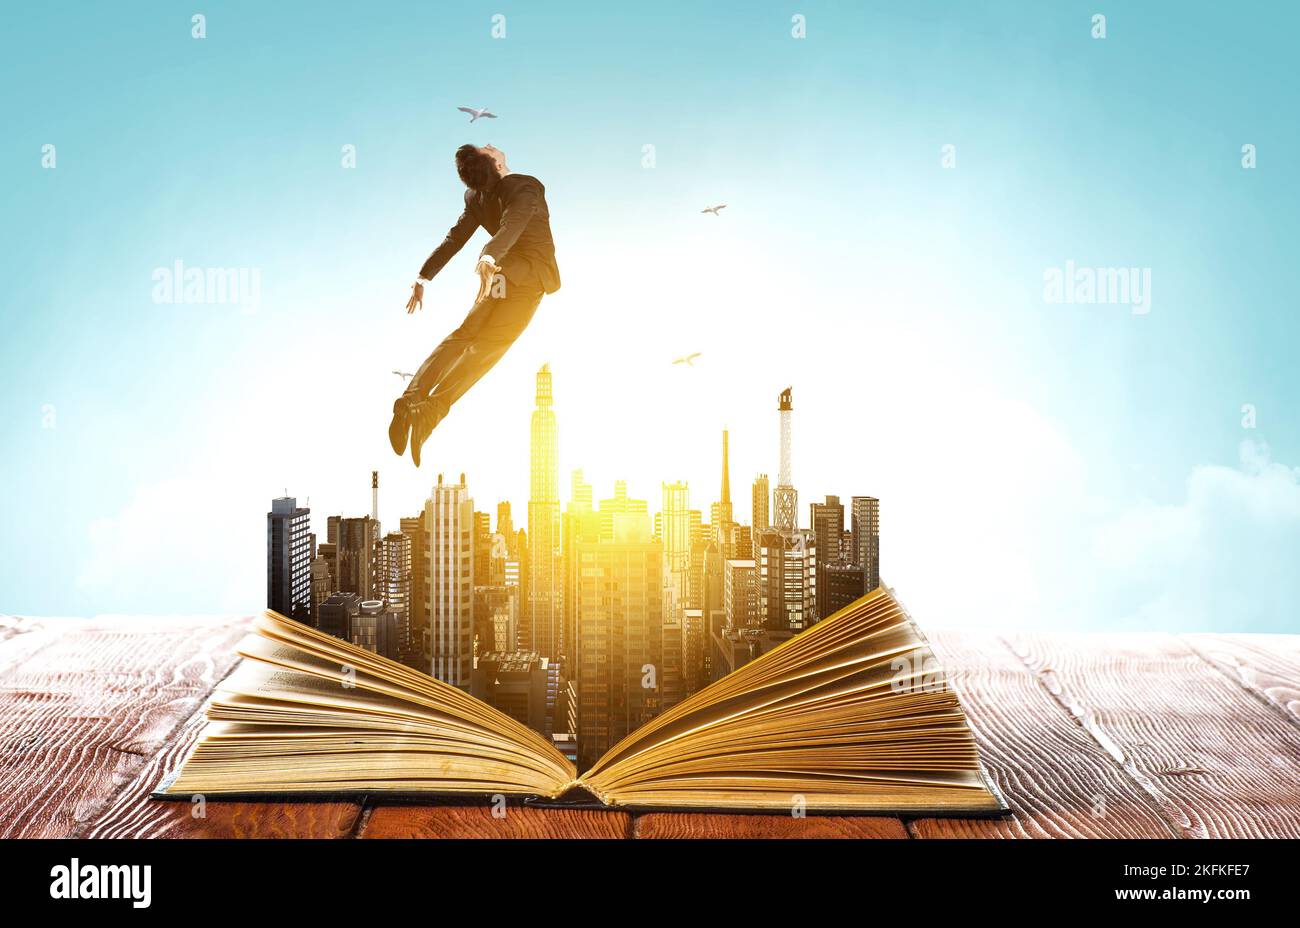 Businessman in suit running on top of a book Stock Photo